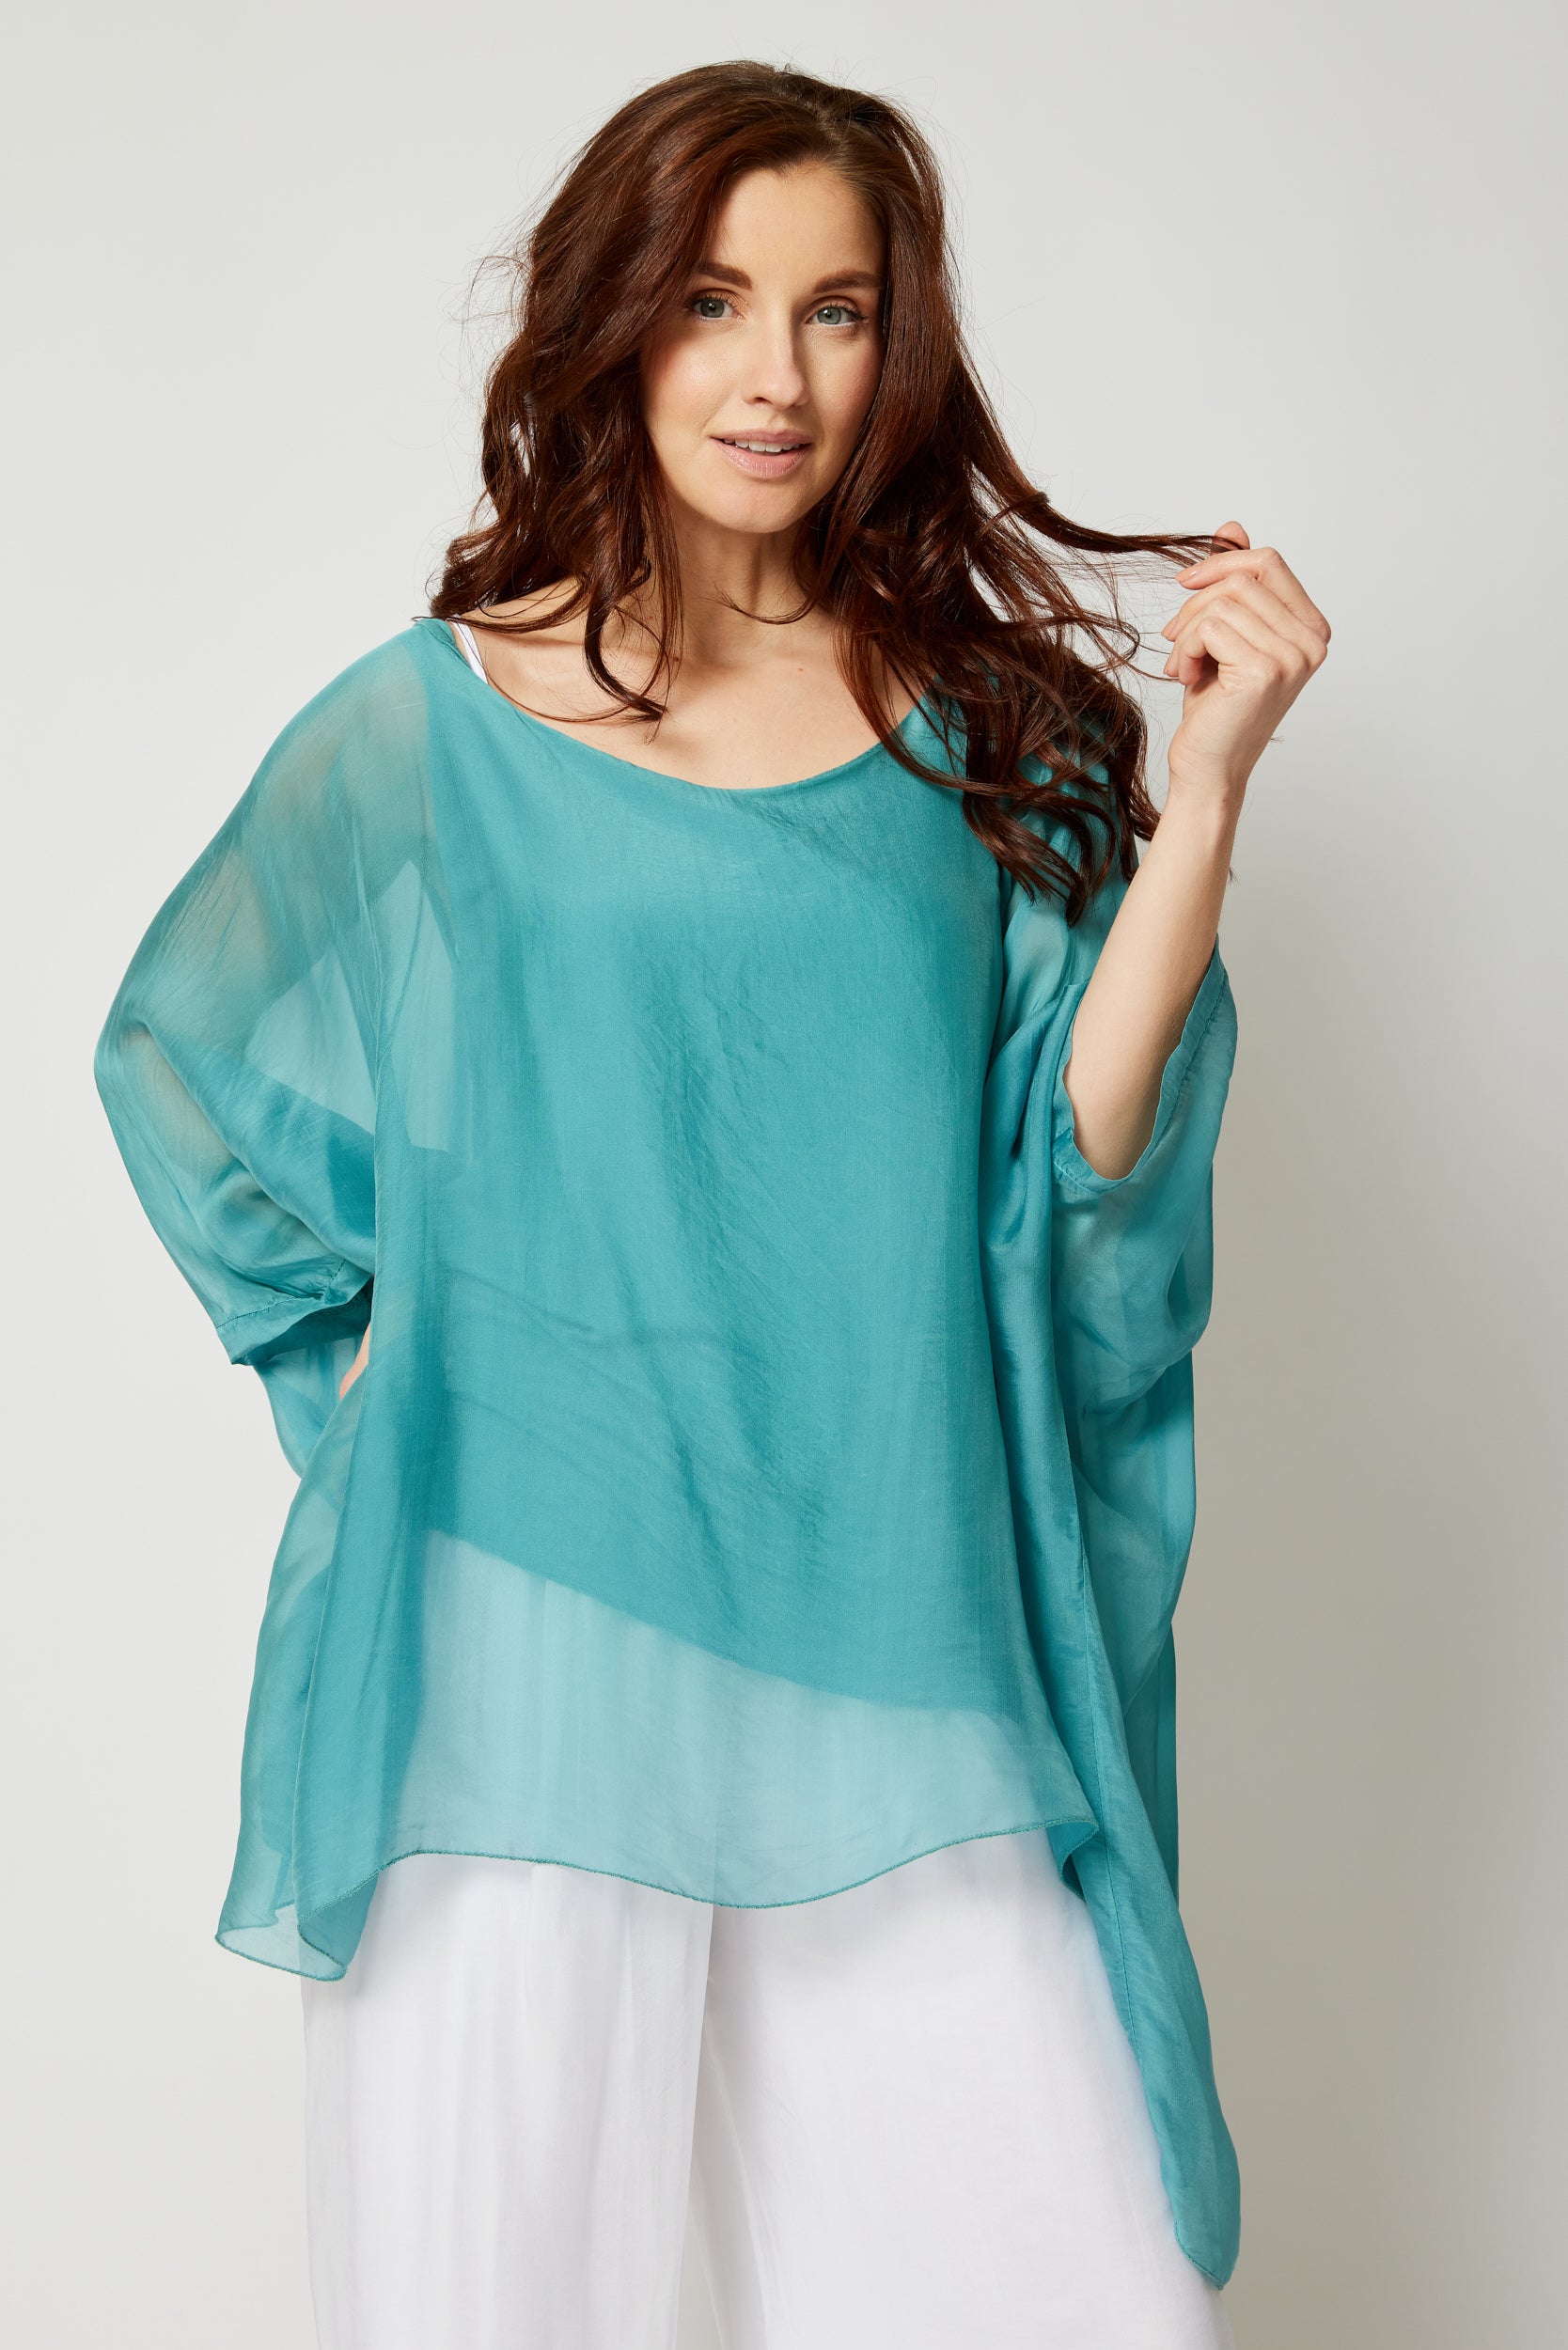 Italian Silk Soft Flowing Top (Two Colors) - Jacqueline B Clothing